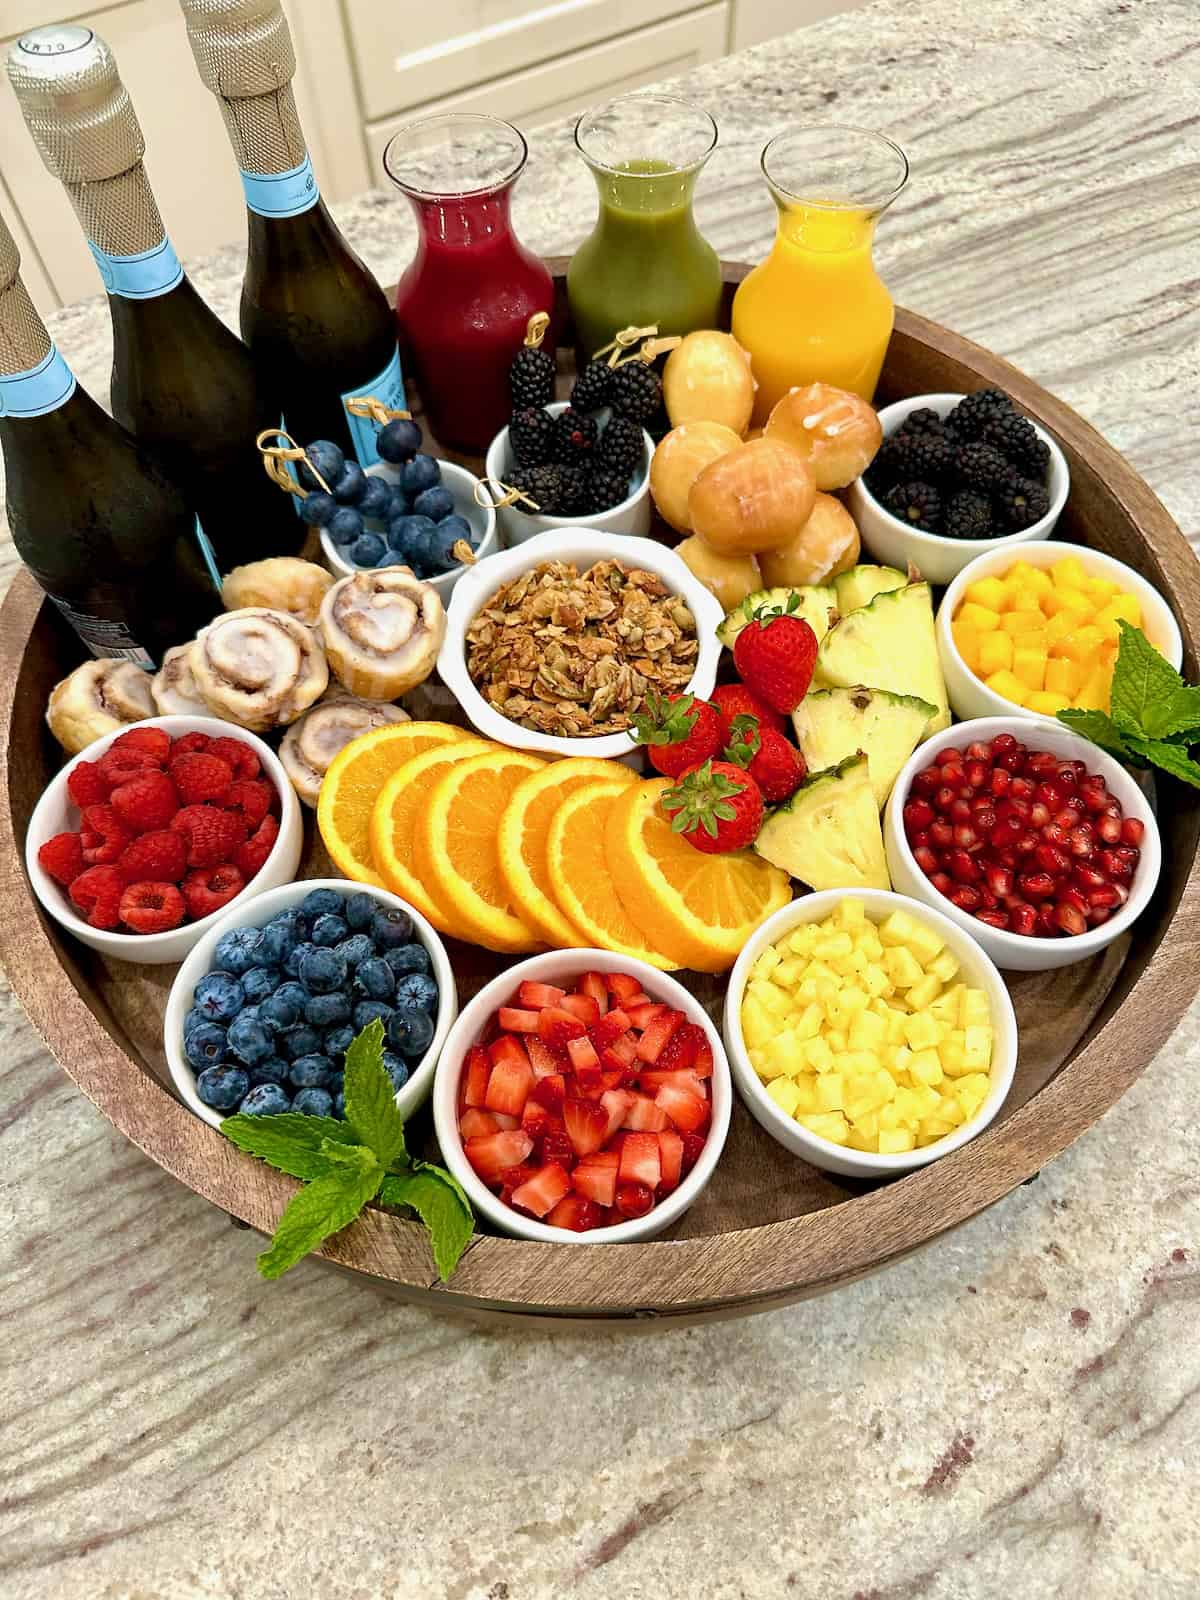 A large rimmed wood Lazy Susan filled with colorful fresh fruits in small white dishes, glass carafes of fruit juice and three bottles of Prosecco.